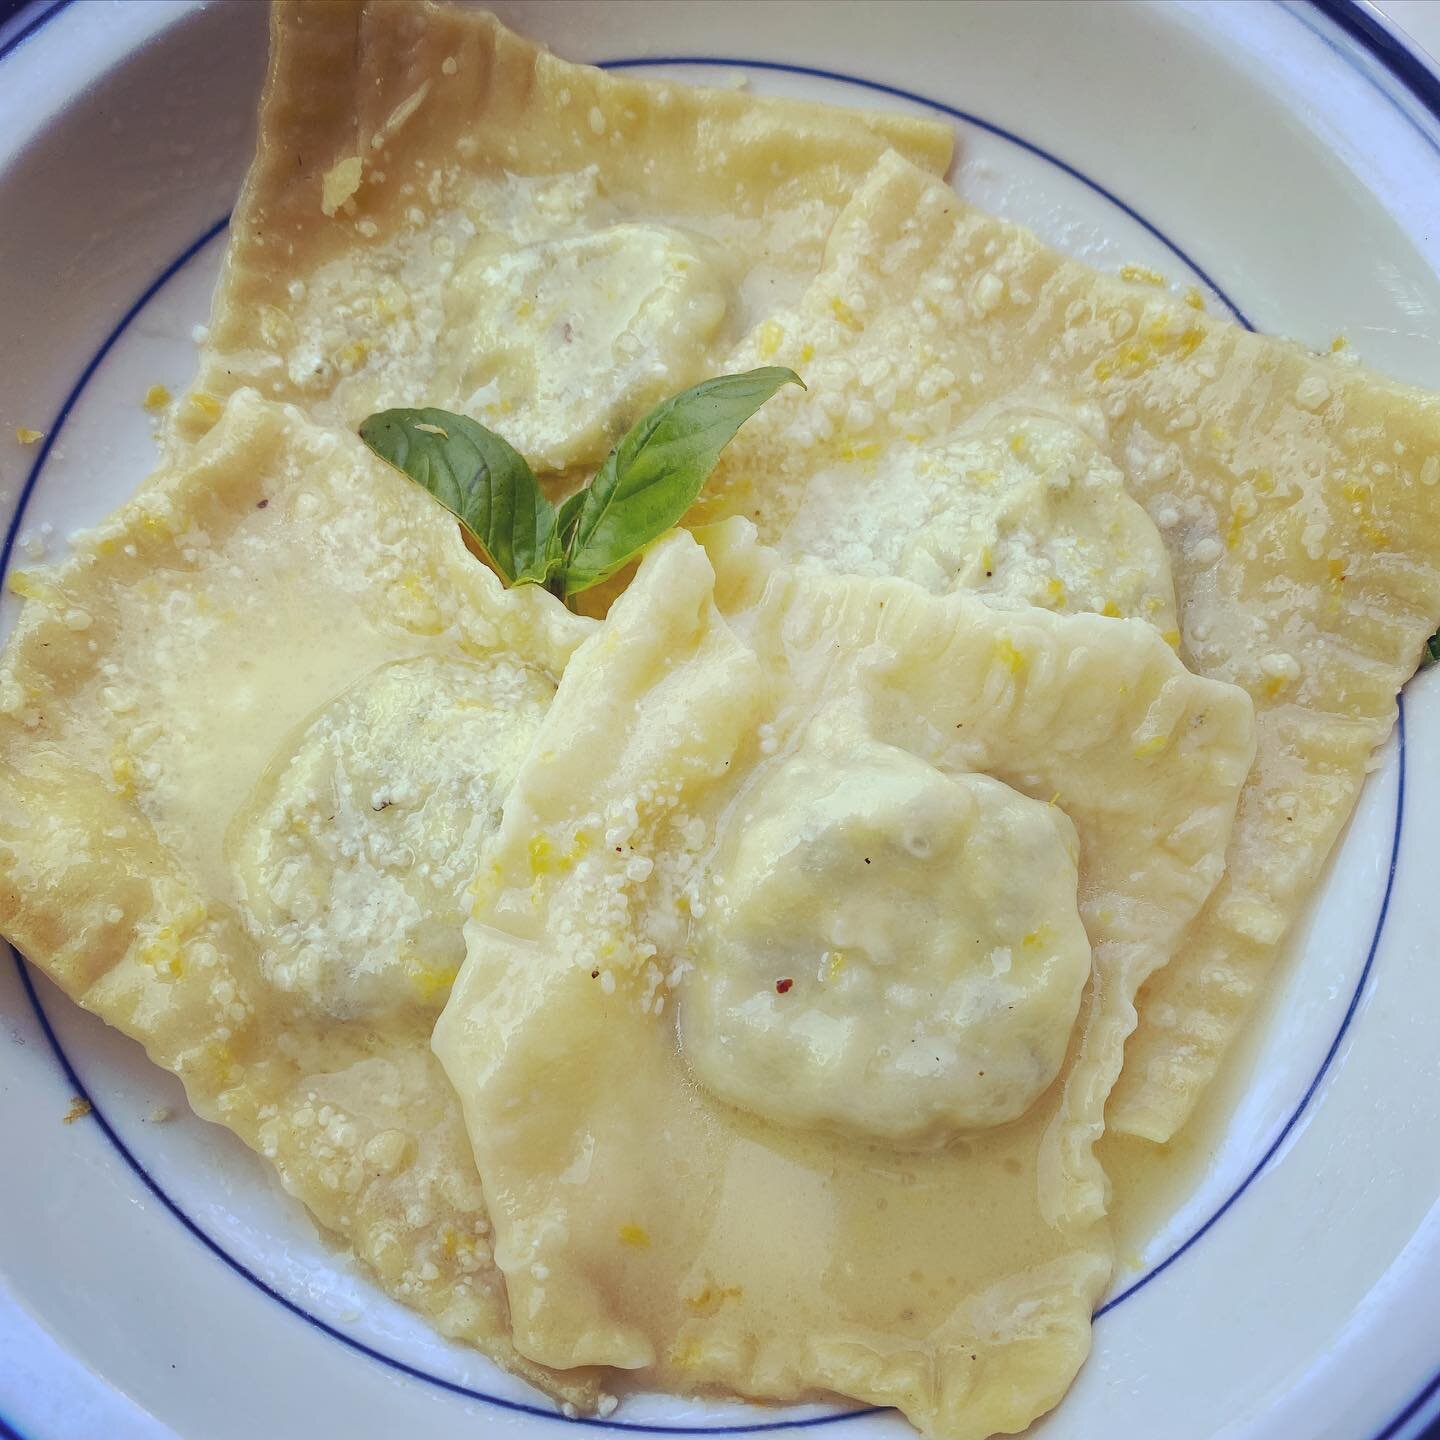 Spinach ricotta ravioli. #cookingwithgirlscouts #cookingwithkids #chefali